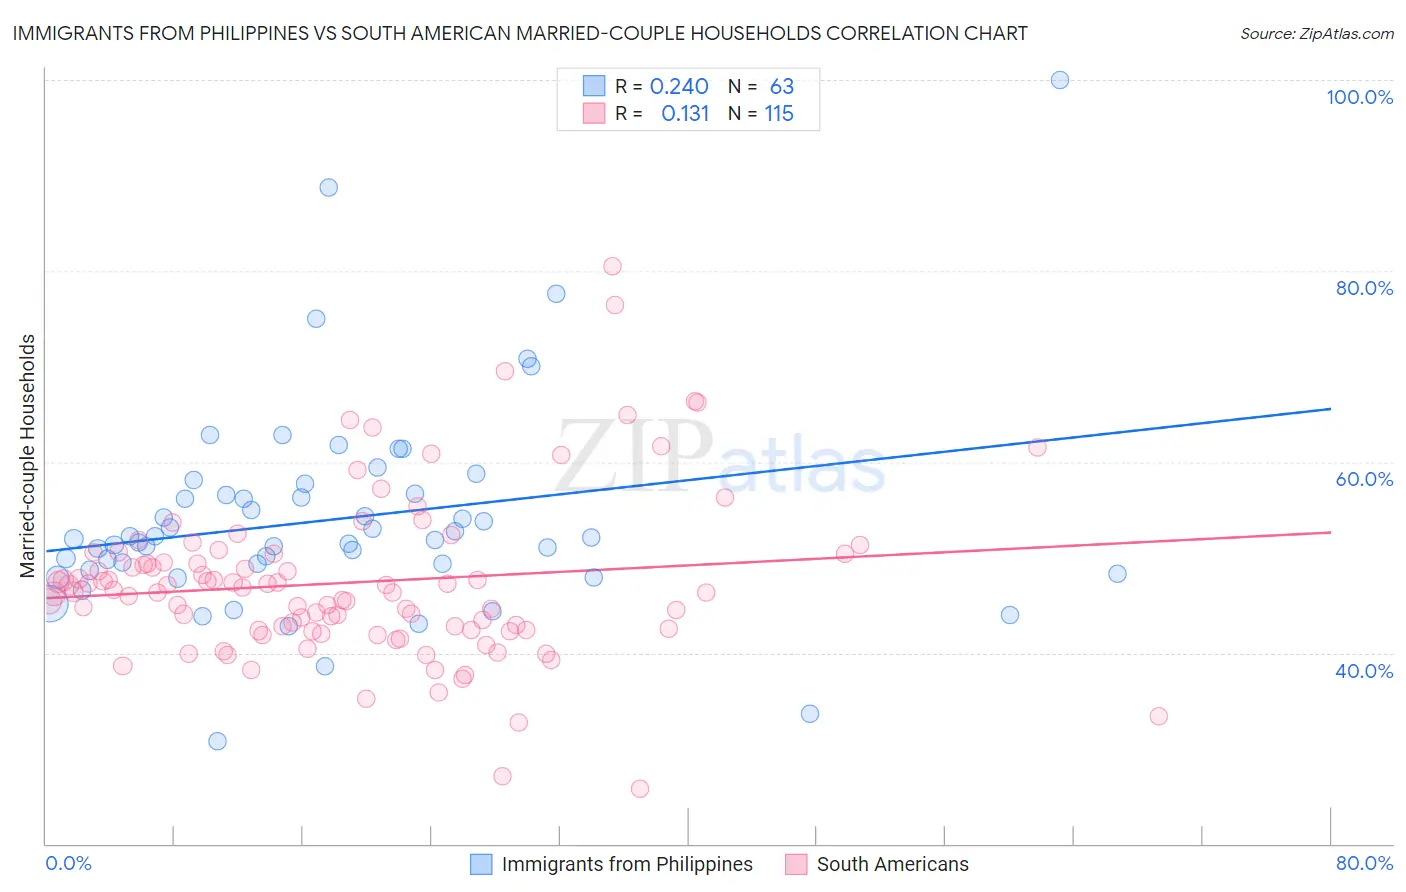 Immigrants from Philippines vs South American Married-couple Households